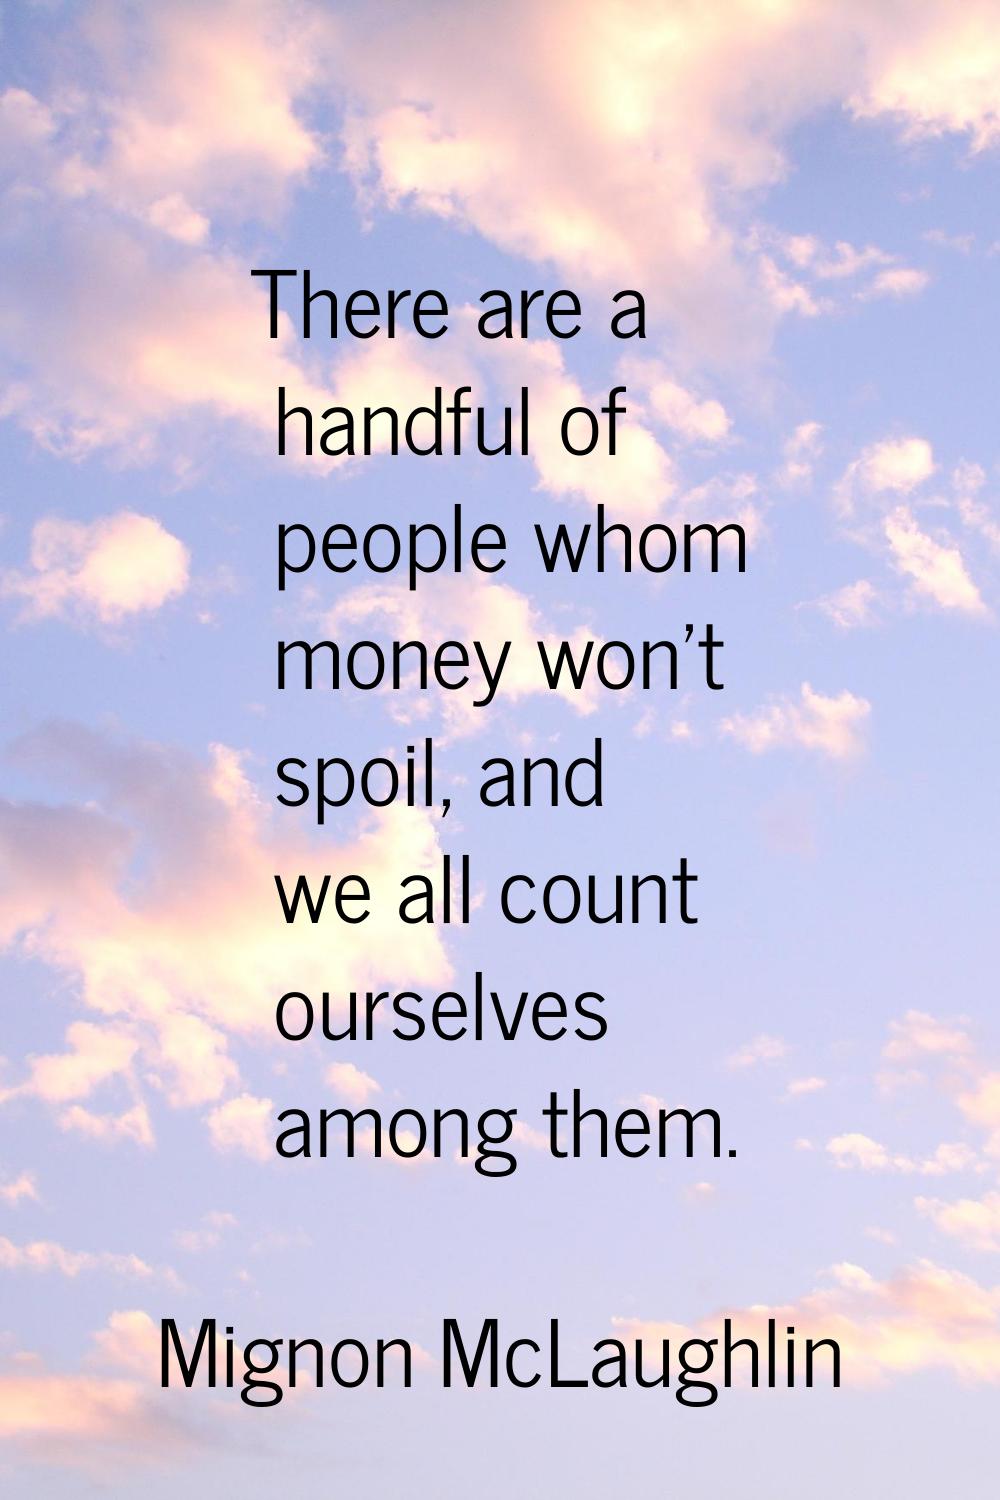 There are a handful of people whom money won't spoil, and we all count ourselves among them.